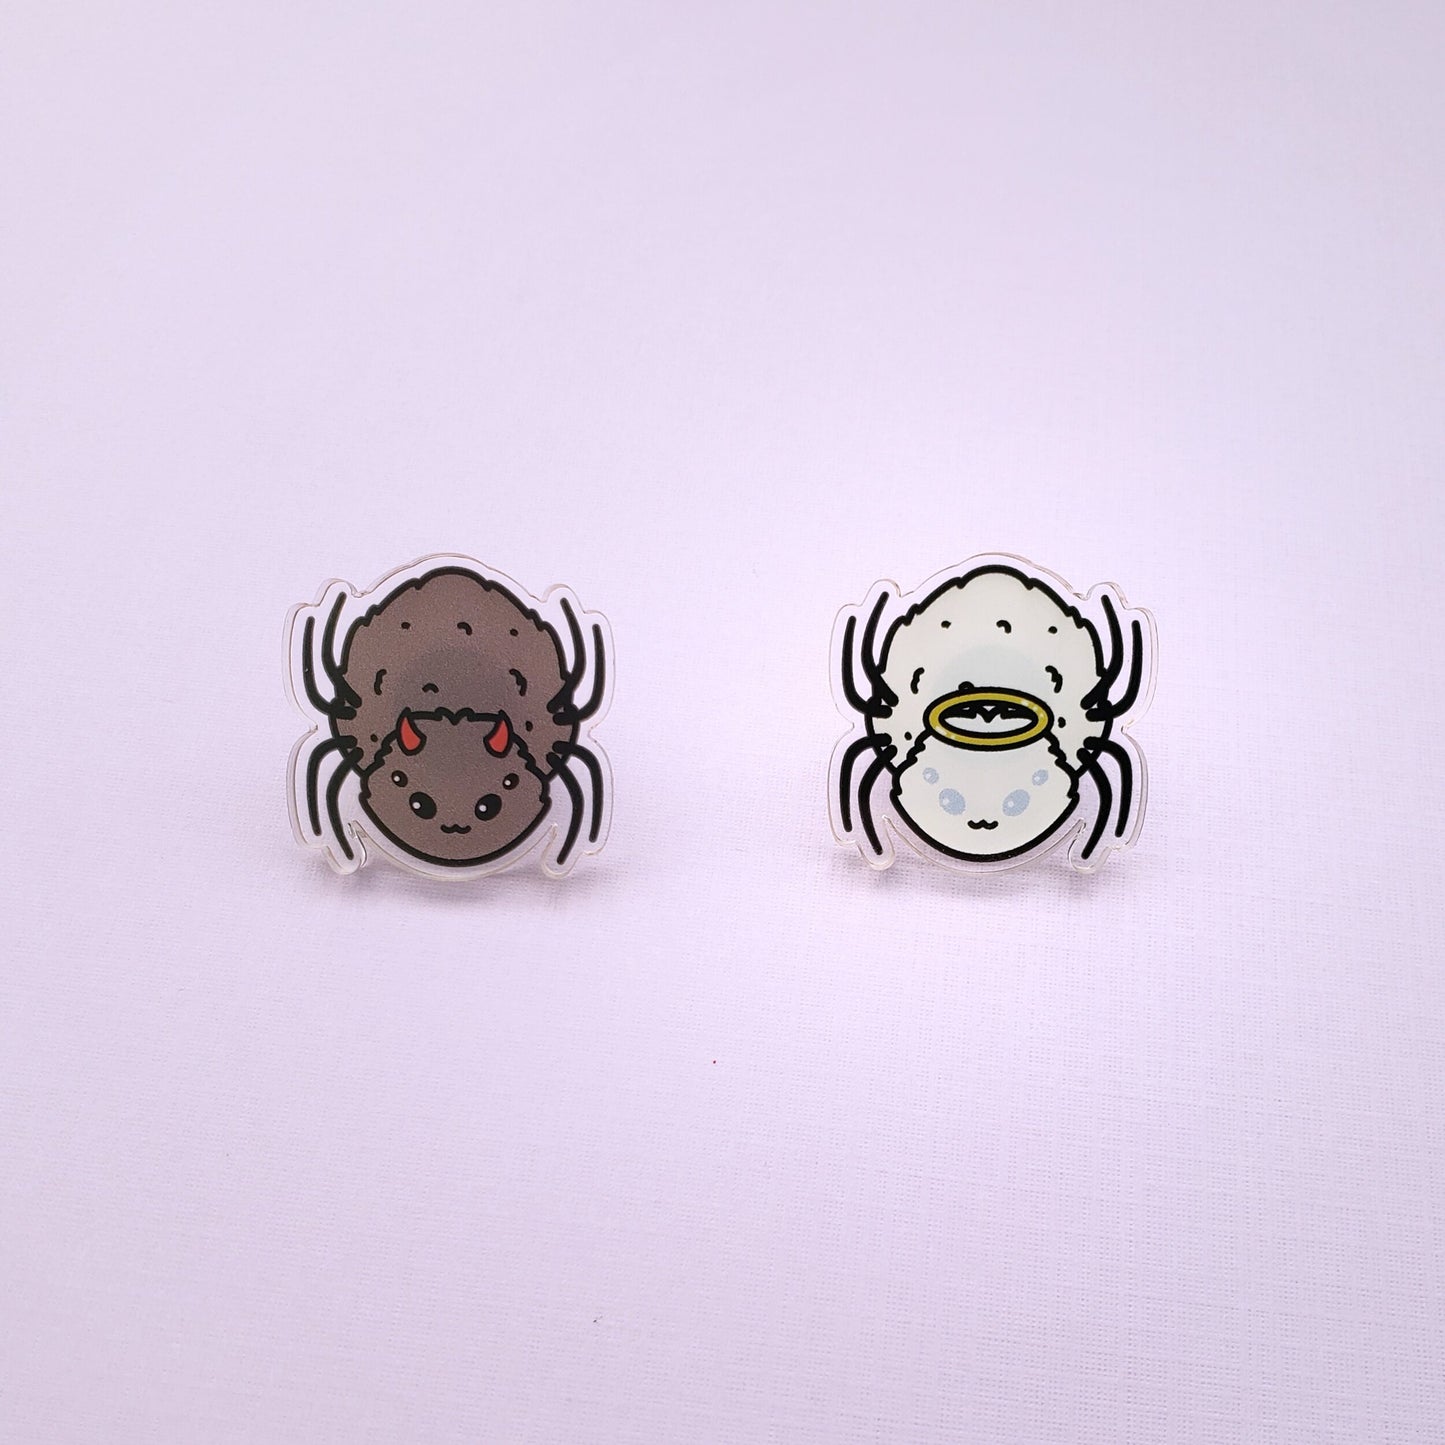 Angel and Devil spider acrylic pin set